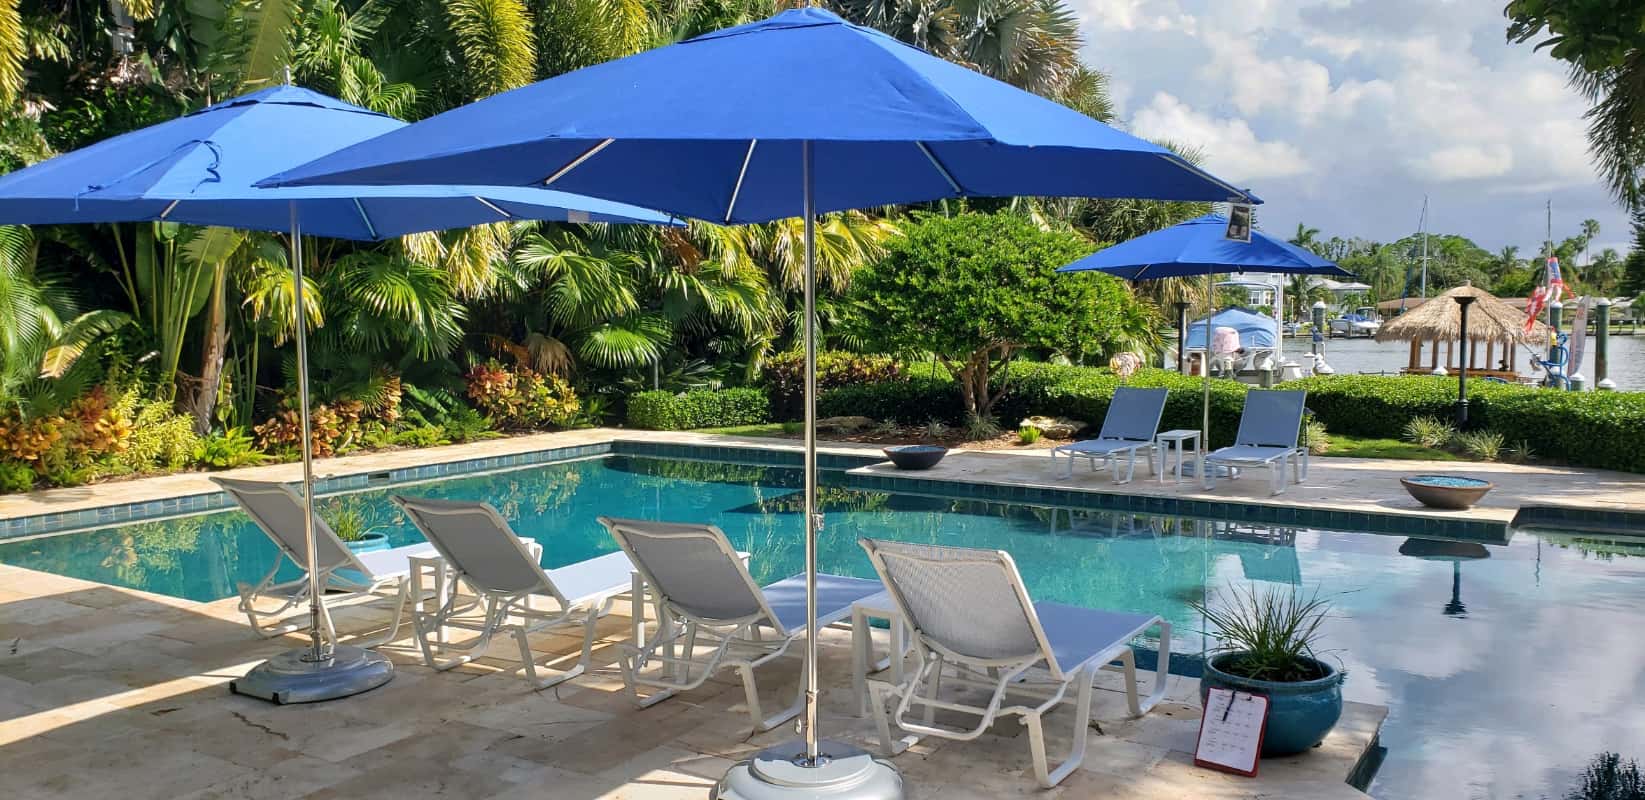 Tuuci chaise lounge chairs set under umbrella and facing the pool